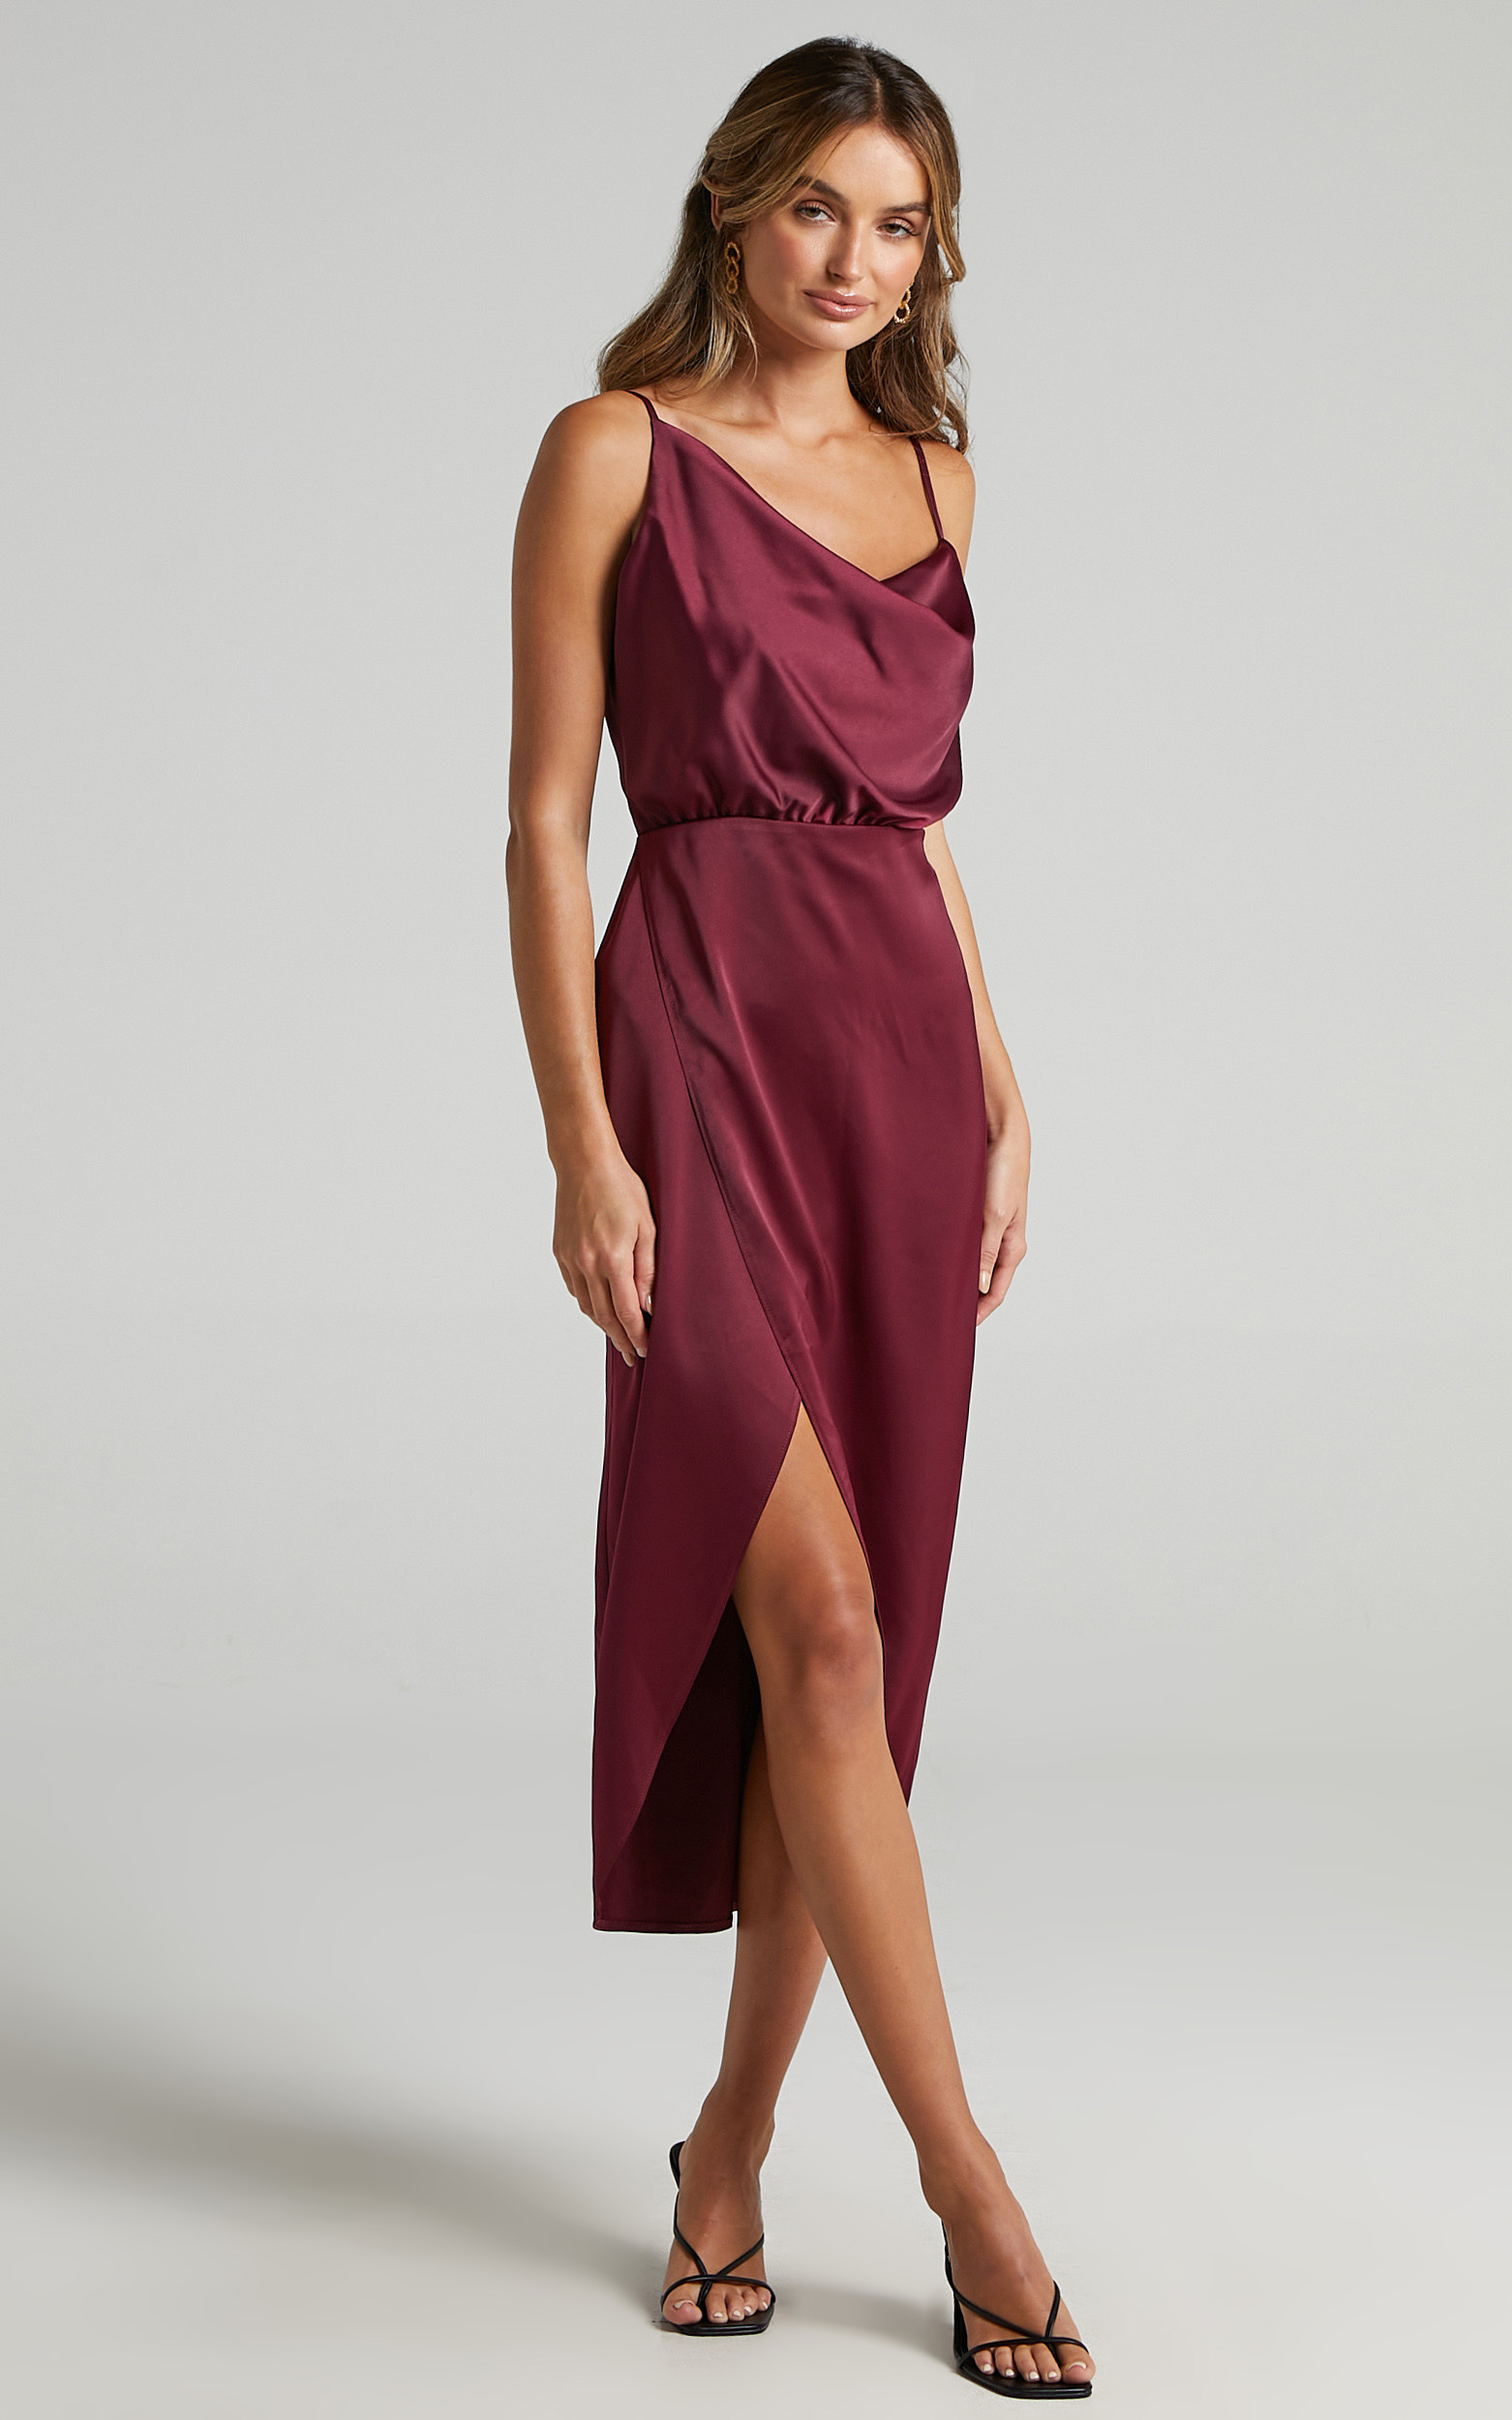 Sisters by Heart Dress in Mulberry Satin | Showpo